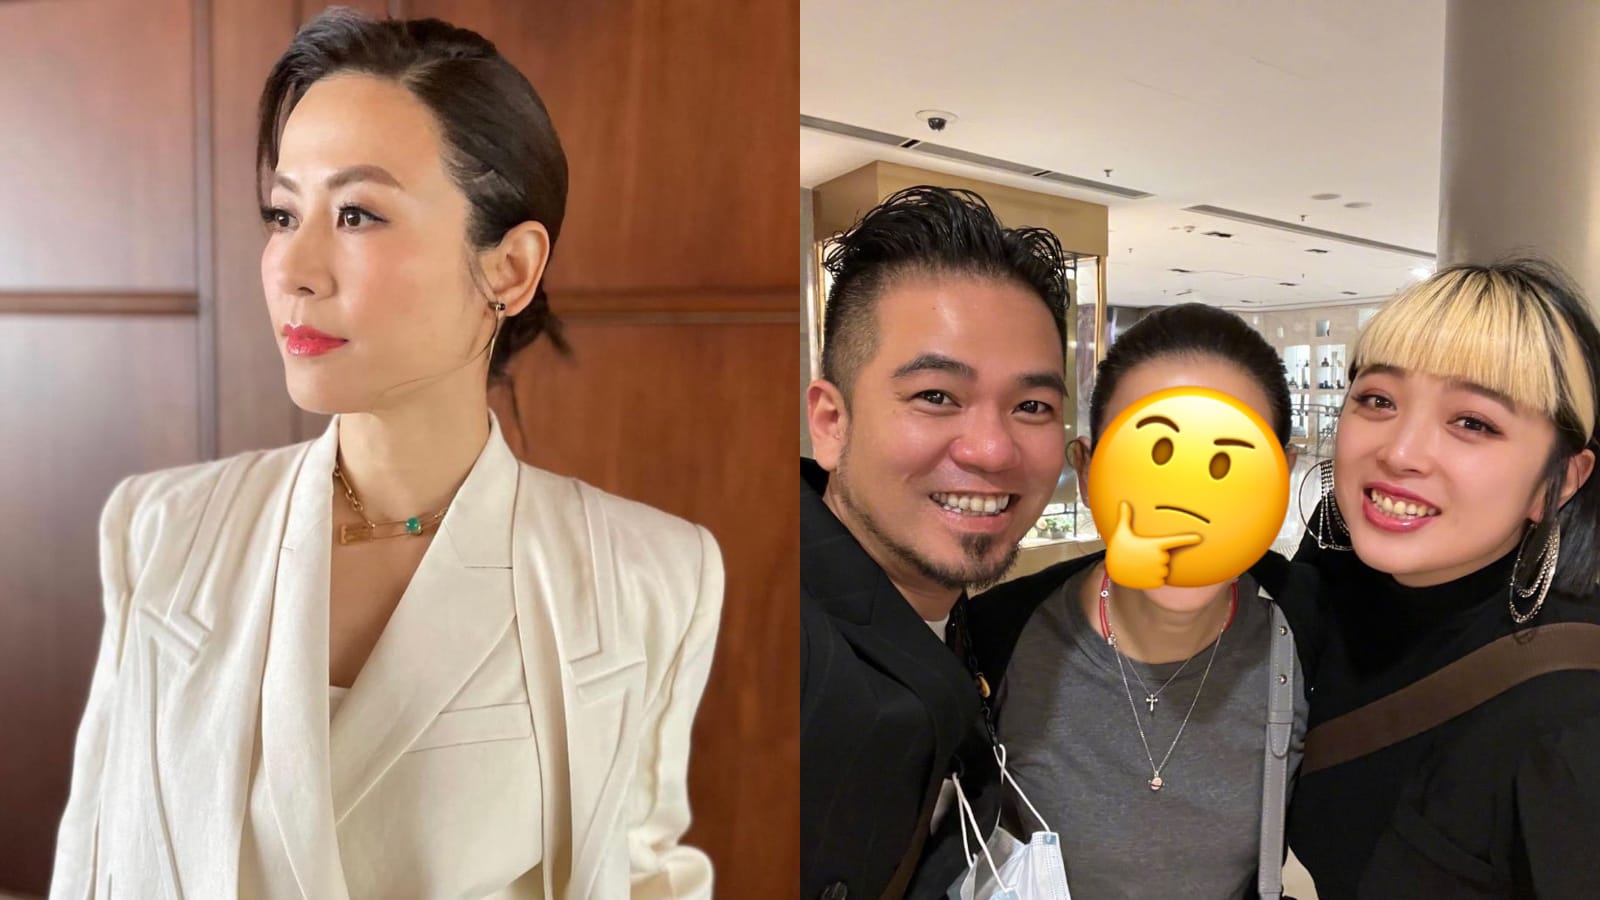 Jessica Hsuan, 51, Posted A Glowing Barefaced Selfie & We Can’t Believe She Was Described As Looking “Haggard”